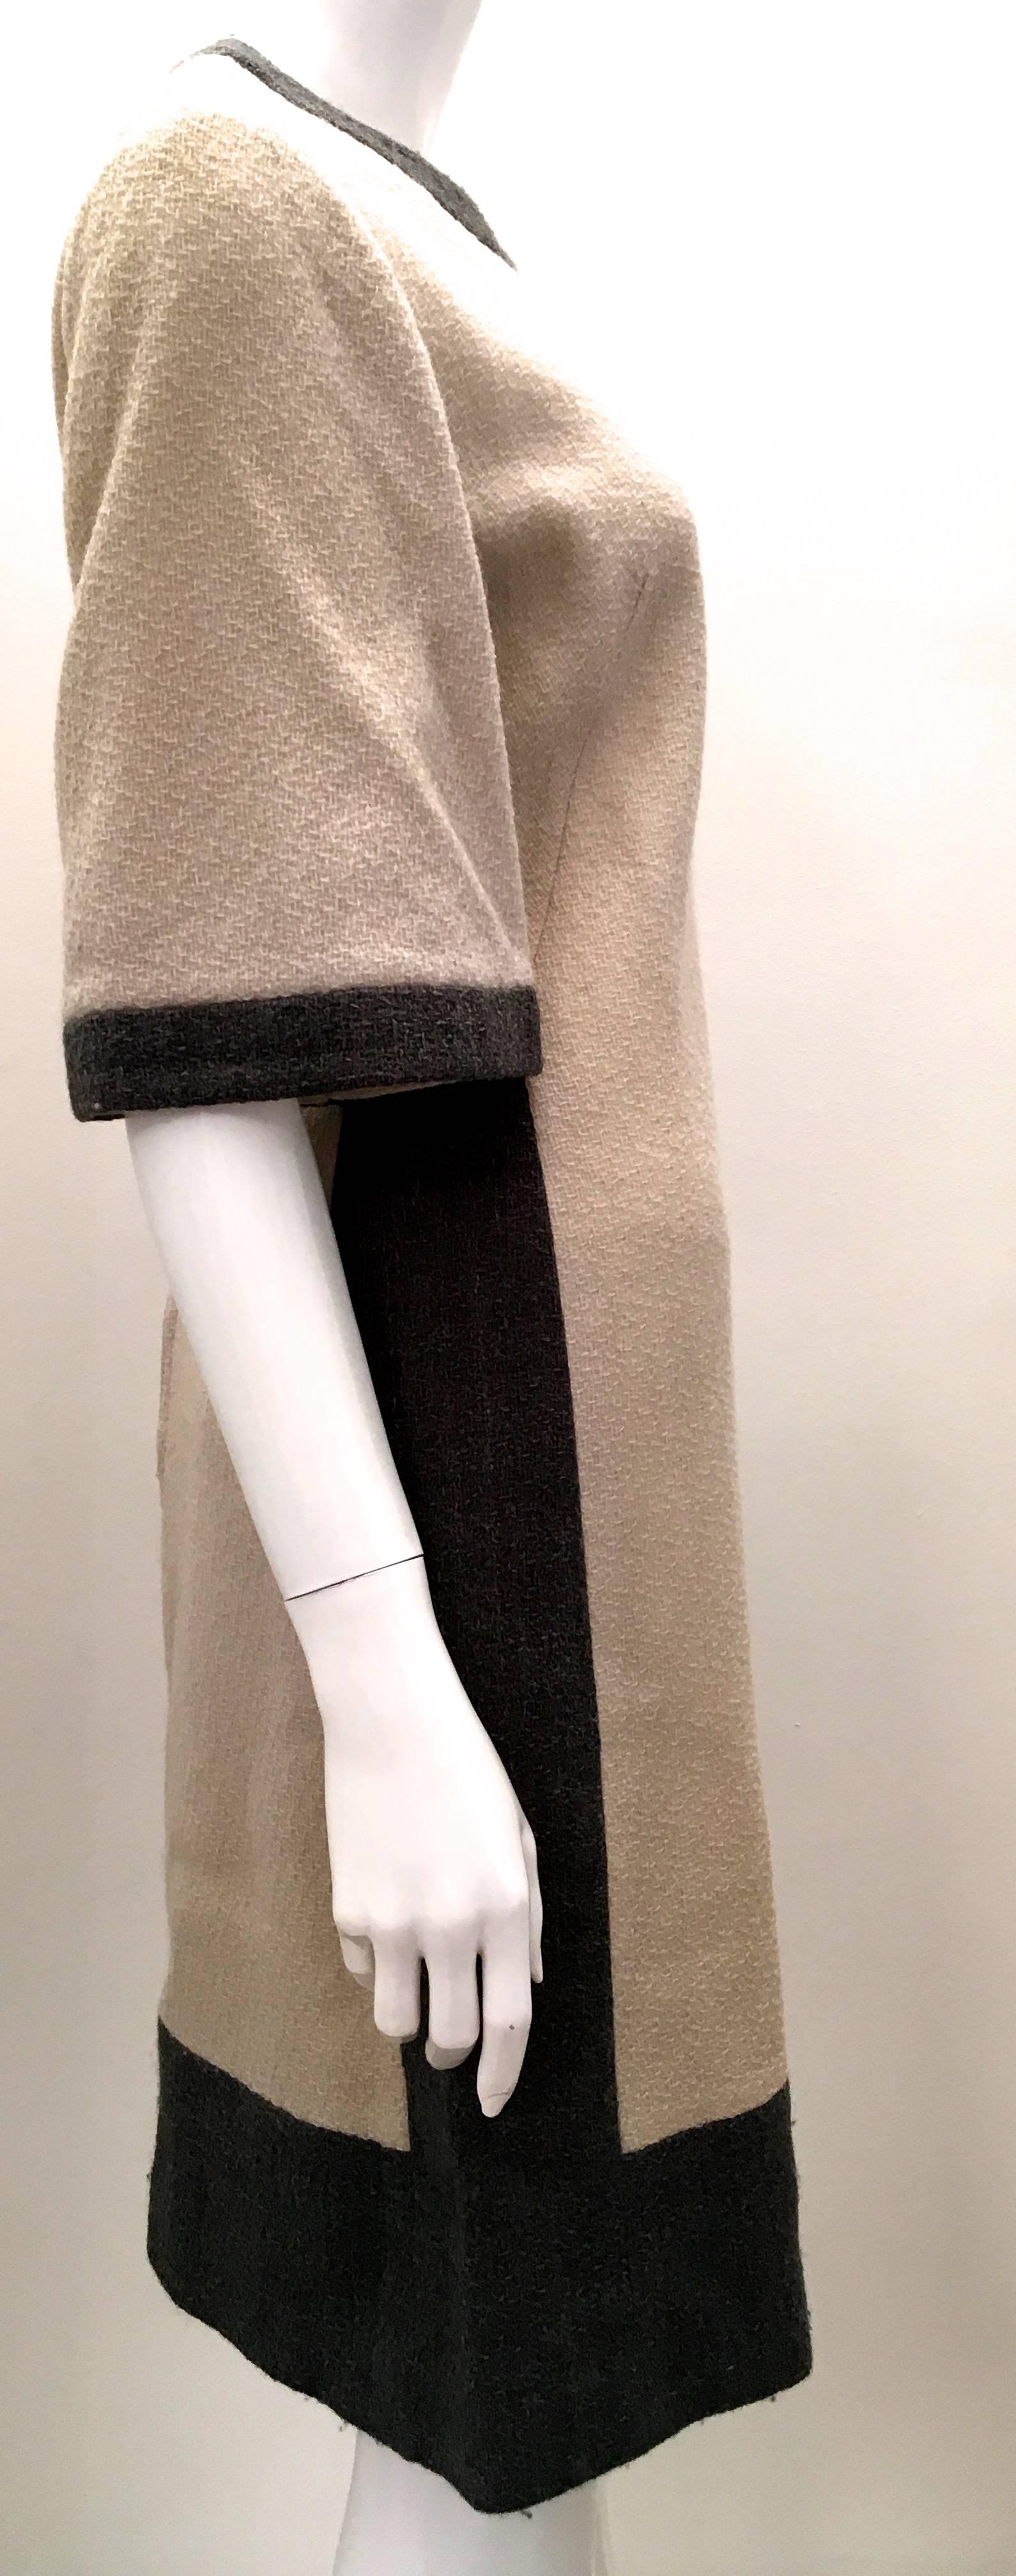 Presented here is a timeless and classic dress by Alison Ayres from the early 1960's. The dress is a creamy beige wool on the front and back with a charcoal gray trim in the same wool fabric around the edges of the dress framing the dress. The